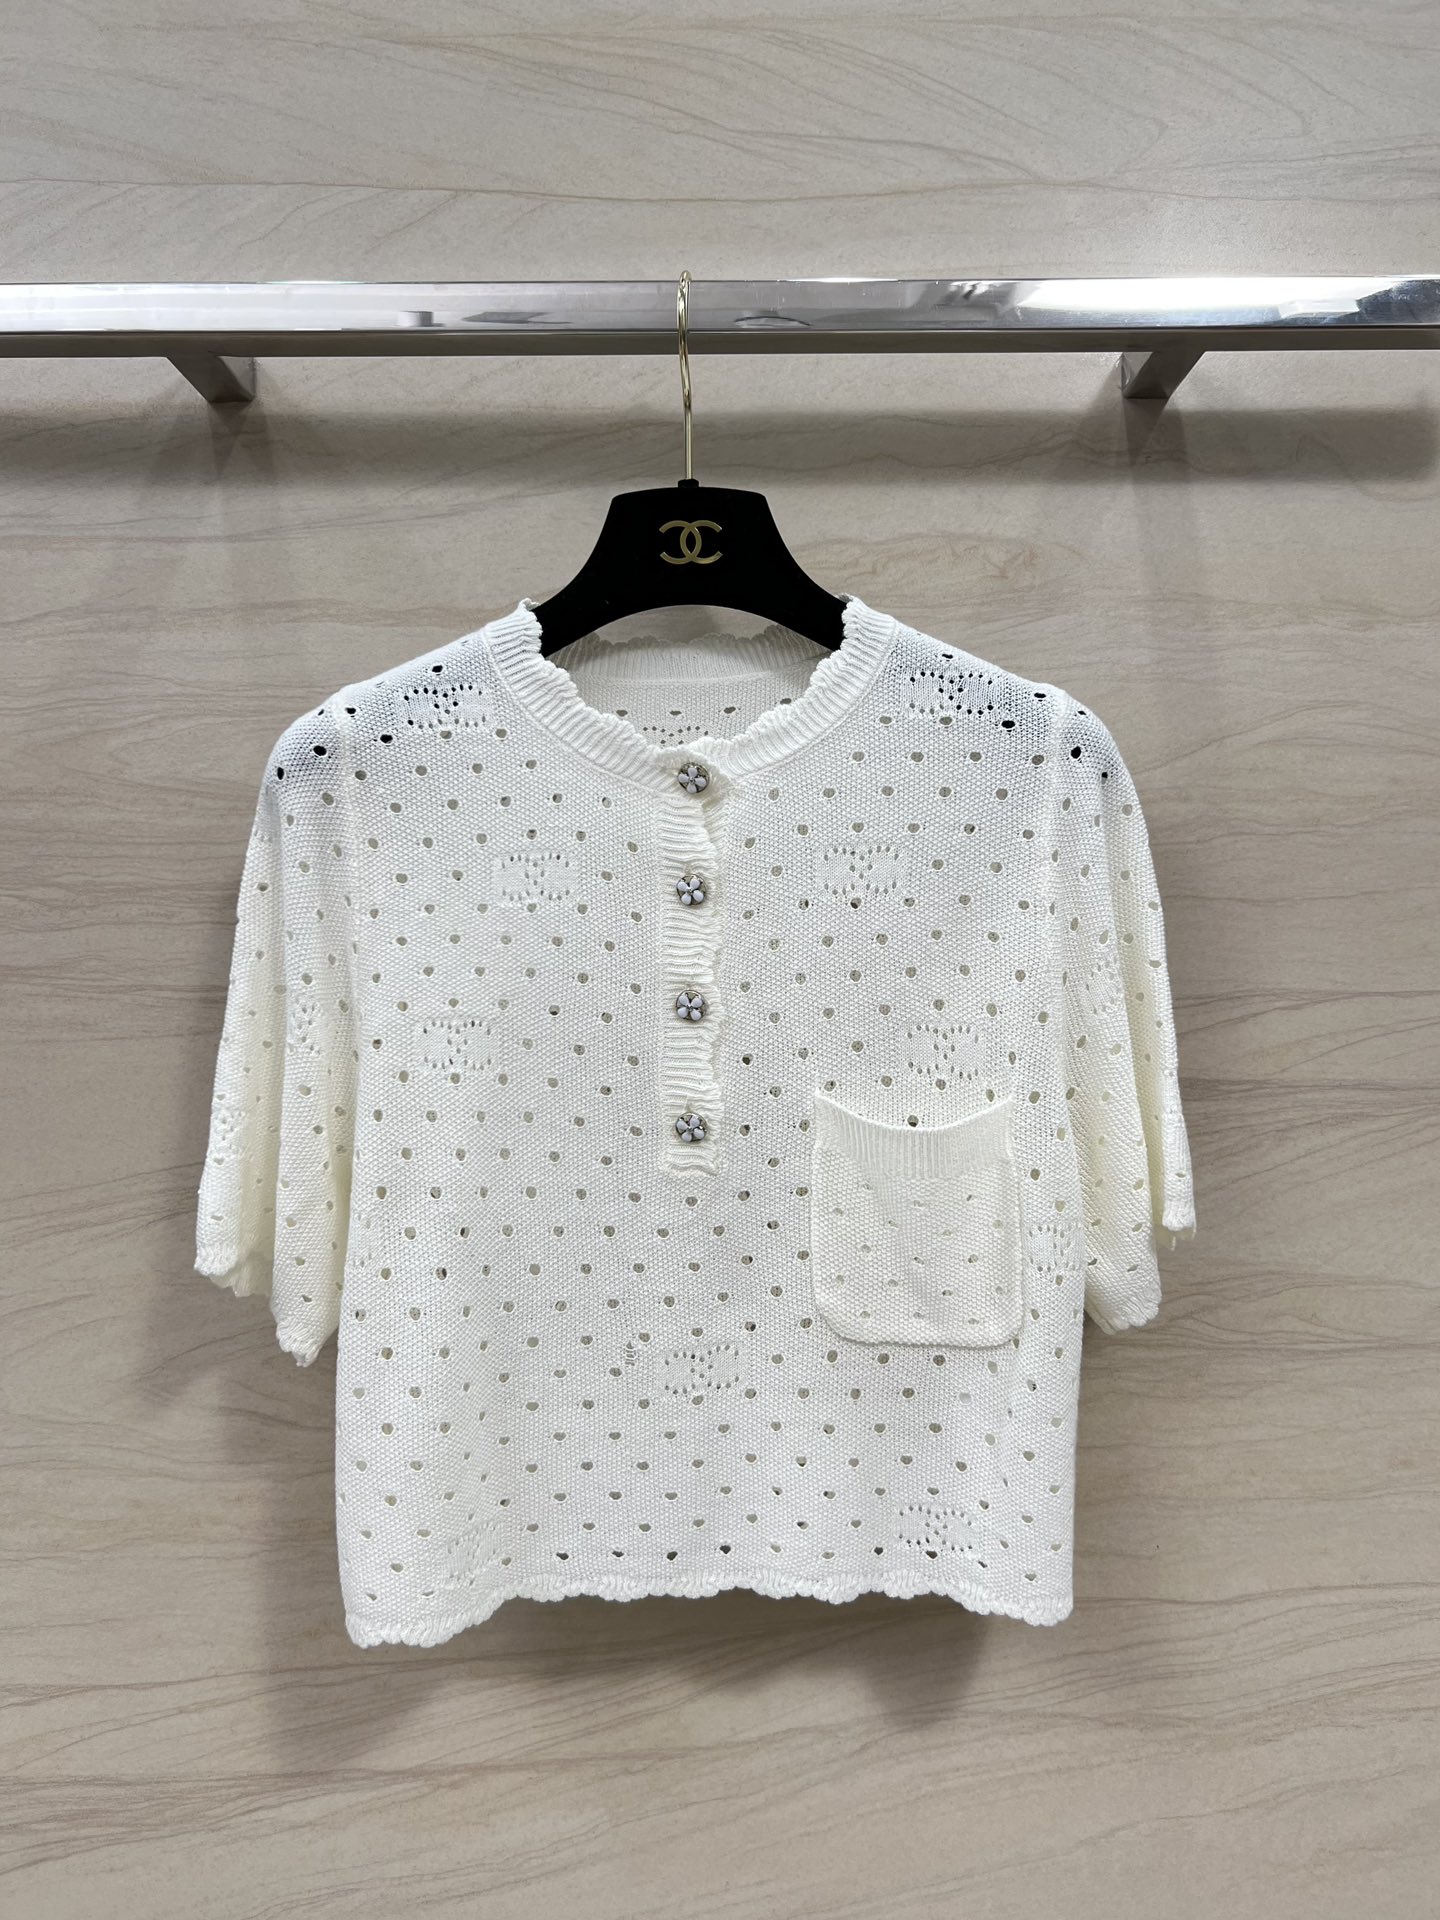 Designer Fake
 Chanel Clothing Shirts & Blouses White Openwork Knitting Spring/Summer Collection